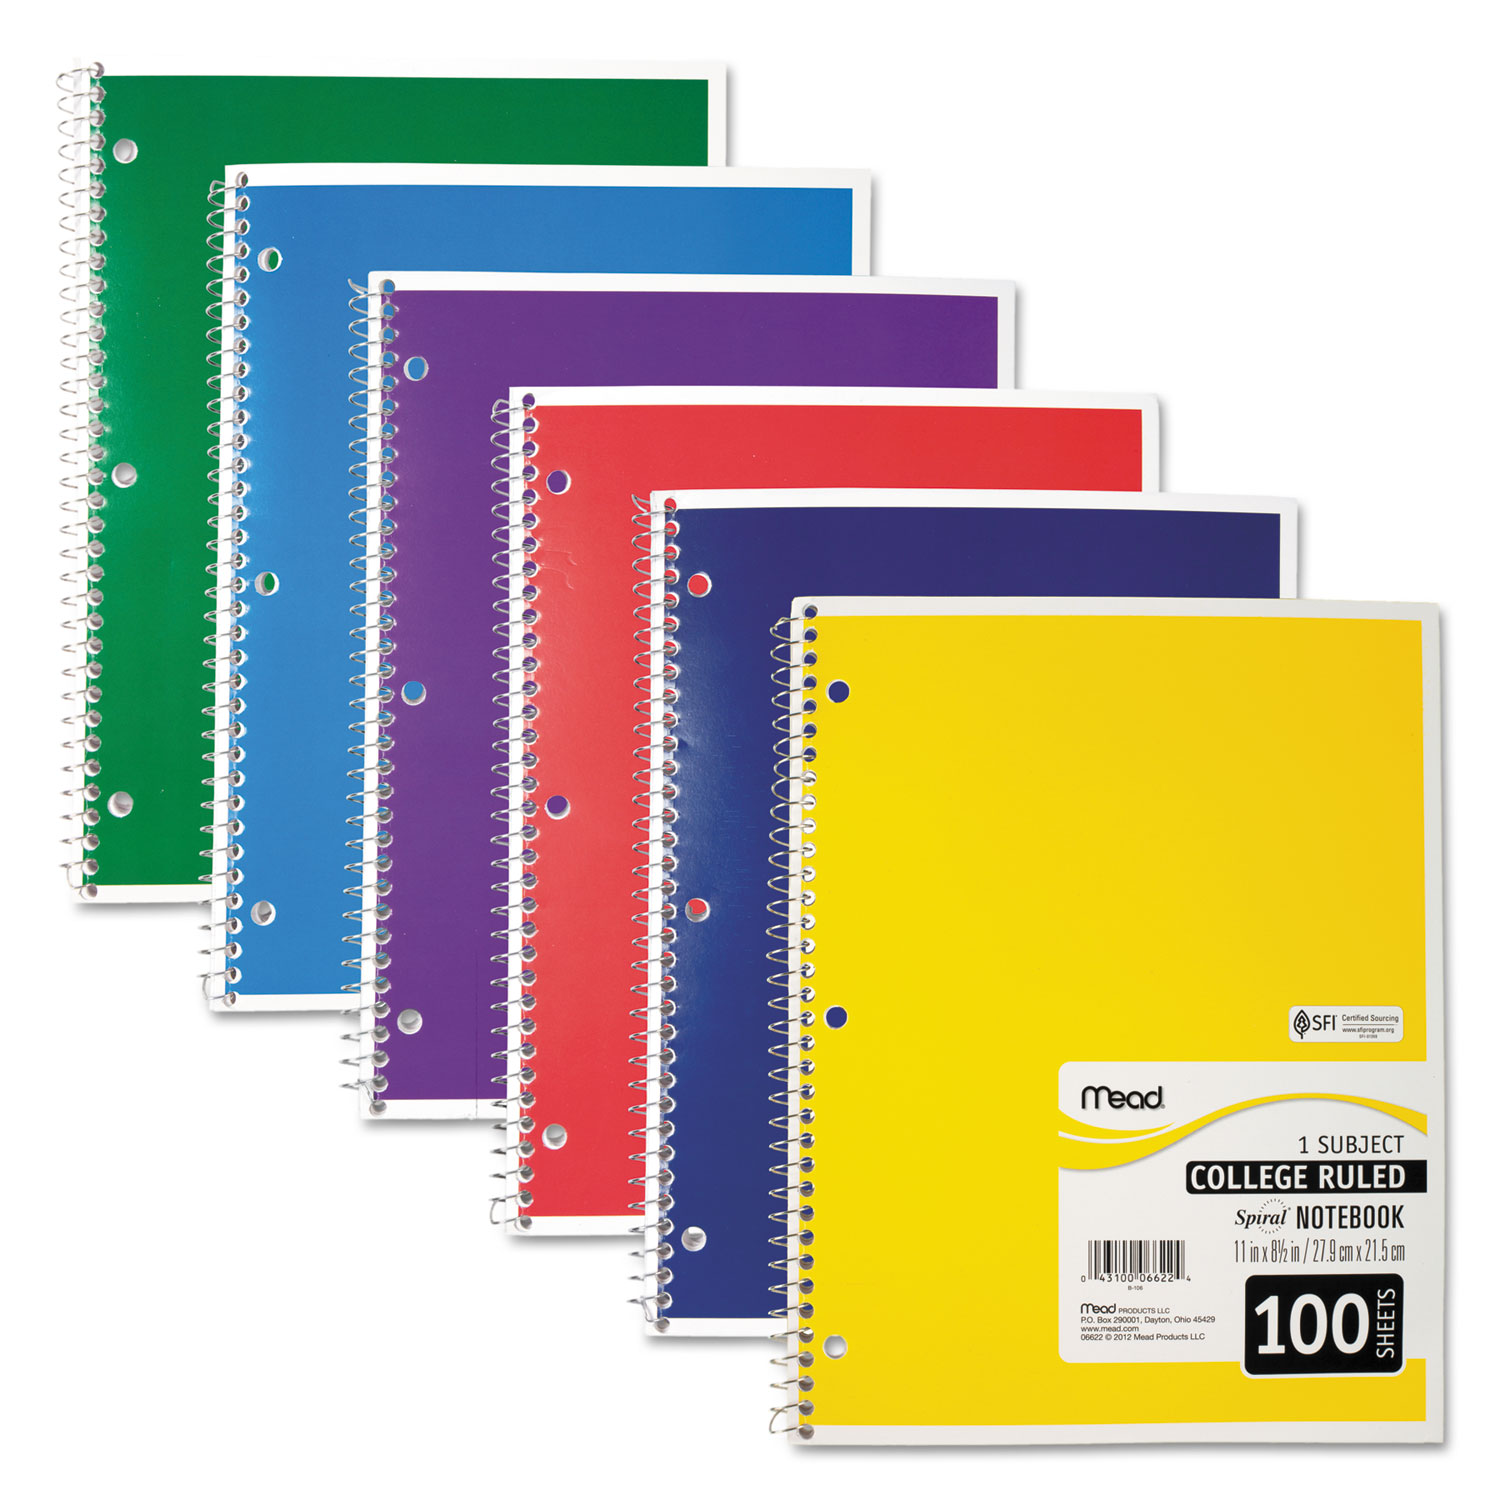  Mead 06622 Spiral Notebook, 1 Subject, Medium/College Rule, Assorted Color Covers, 11 x 8, 100 Sheets (MEA06622) 